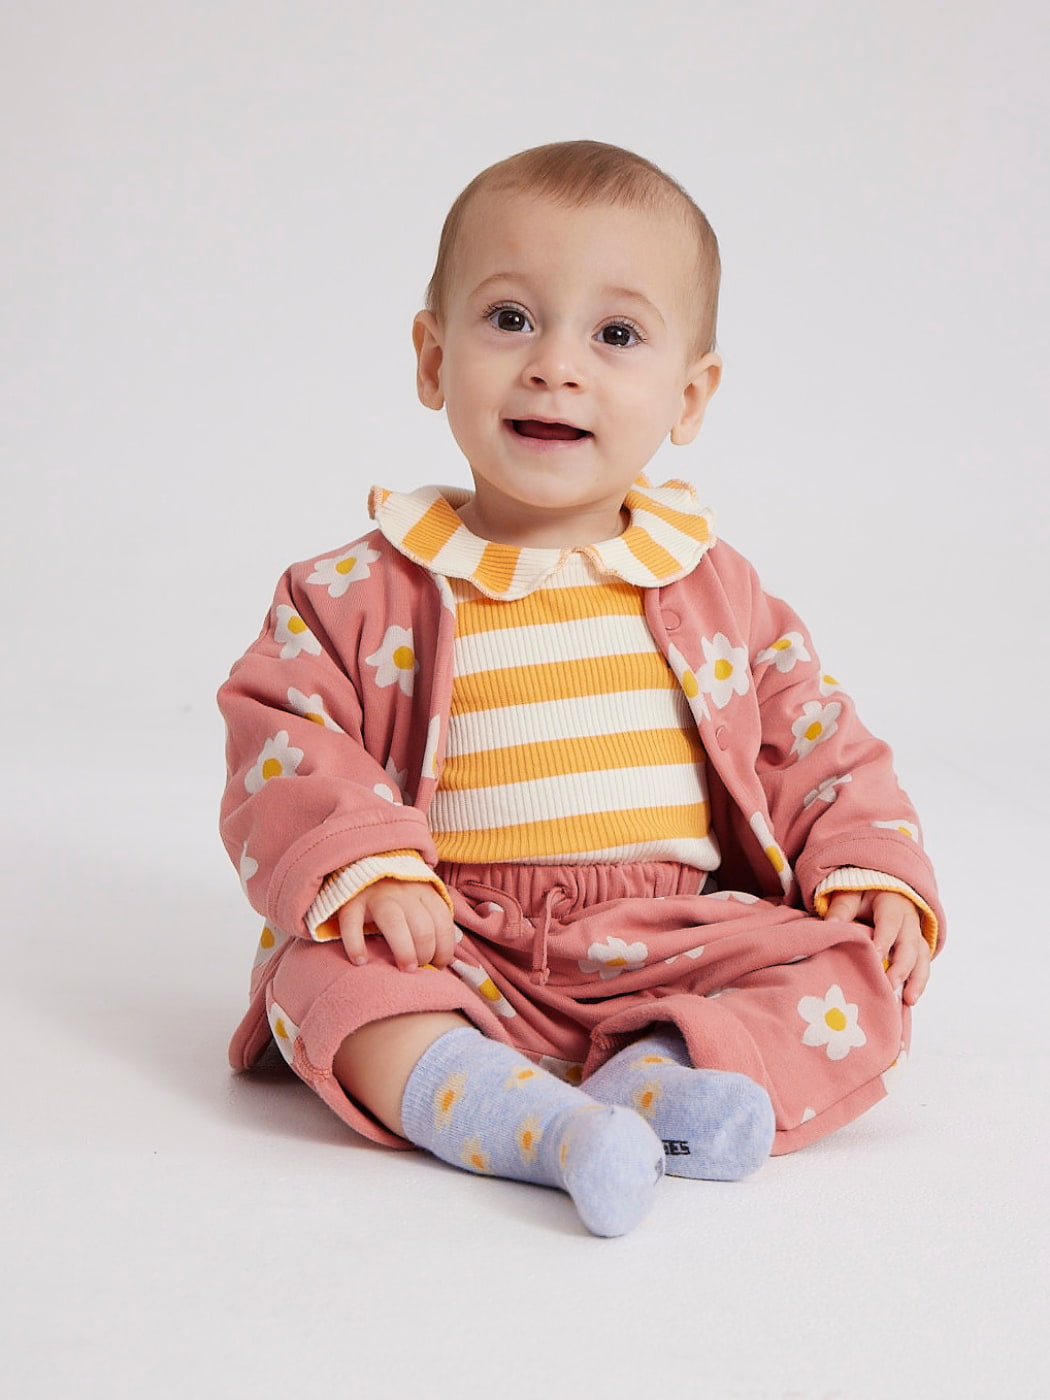 a baby sitting wearing an outfit by bobo choses including a button up pink jacket with flowers on it and a stripey yellow top underneath